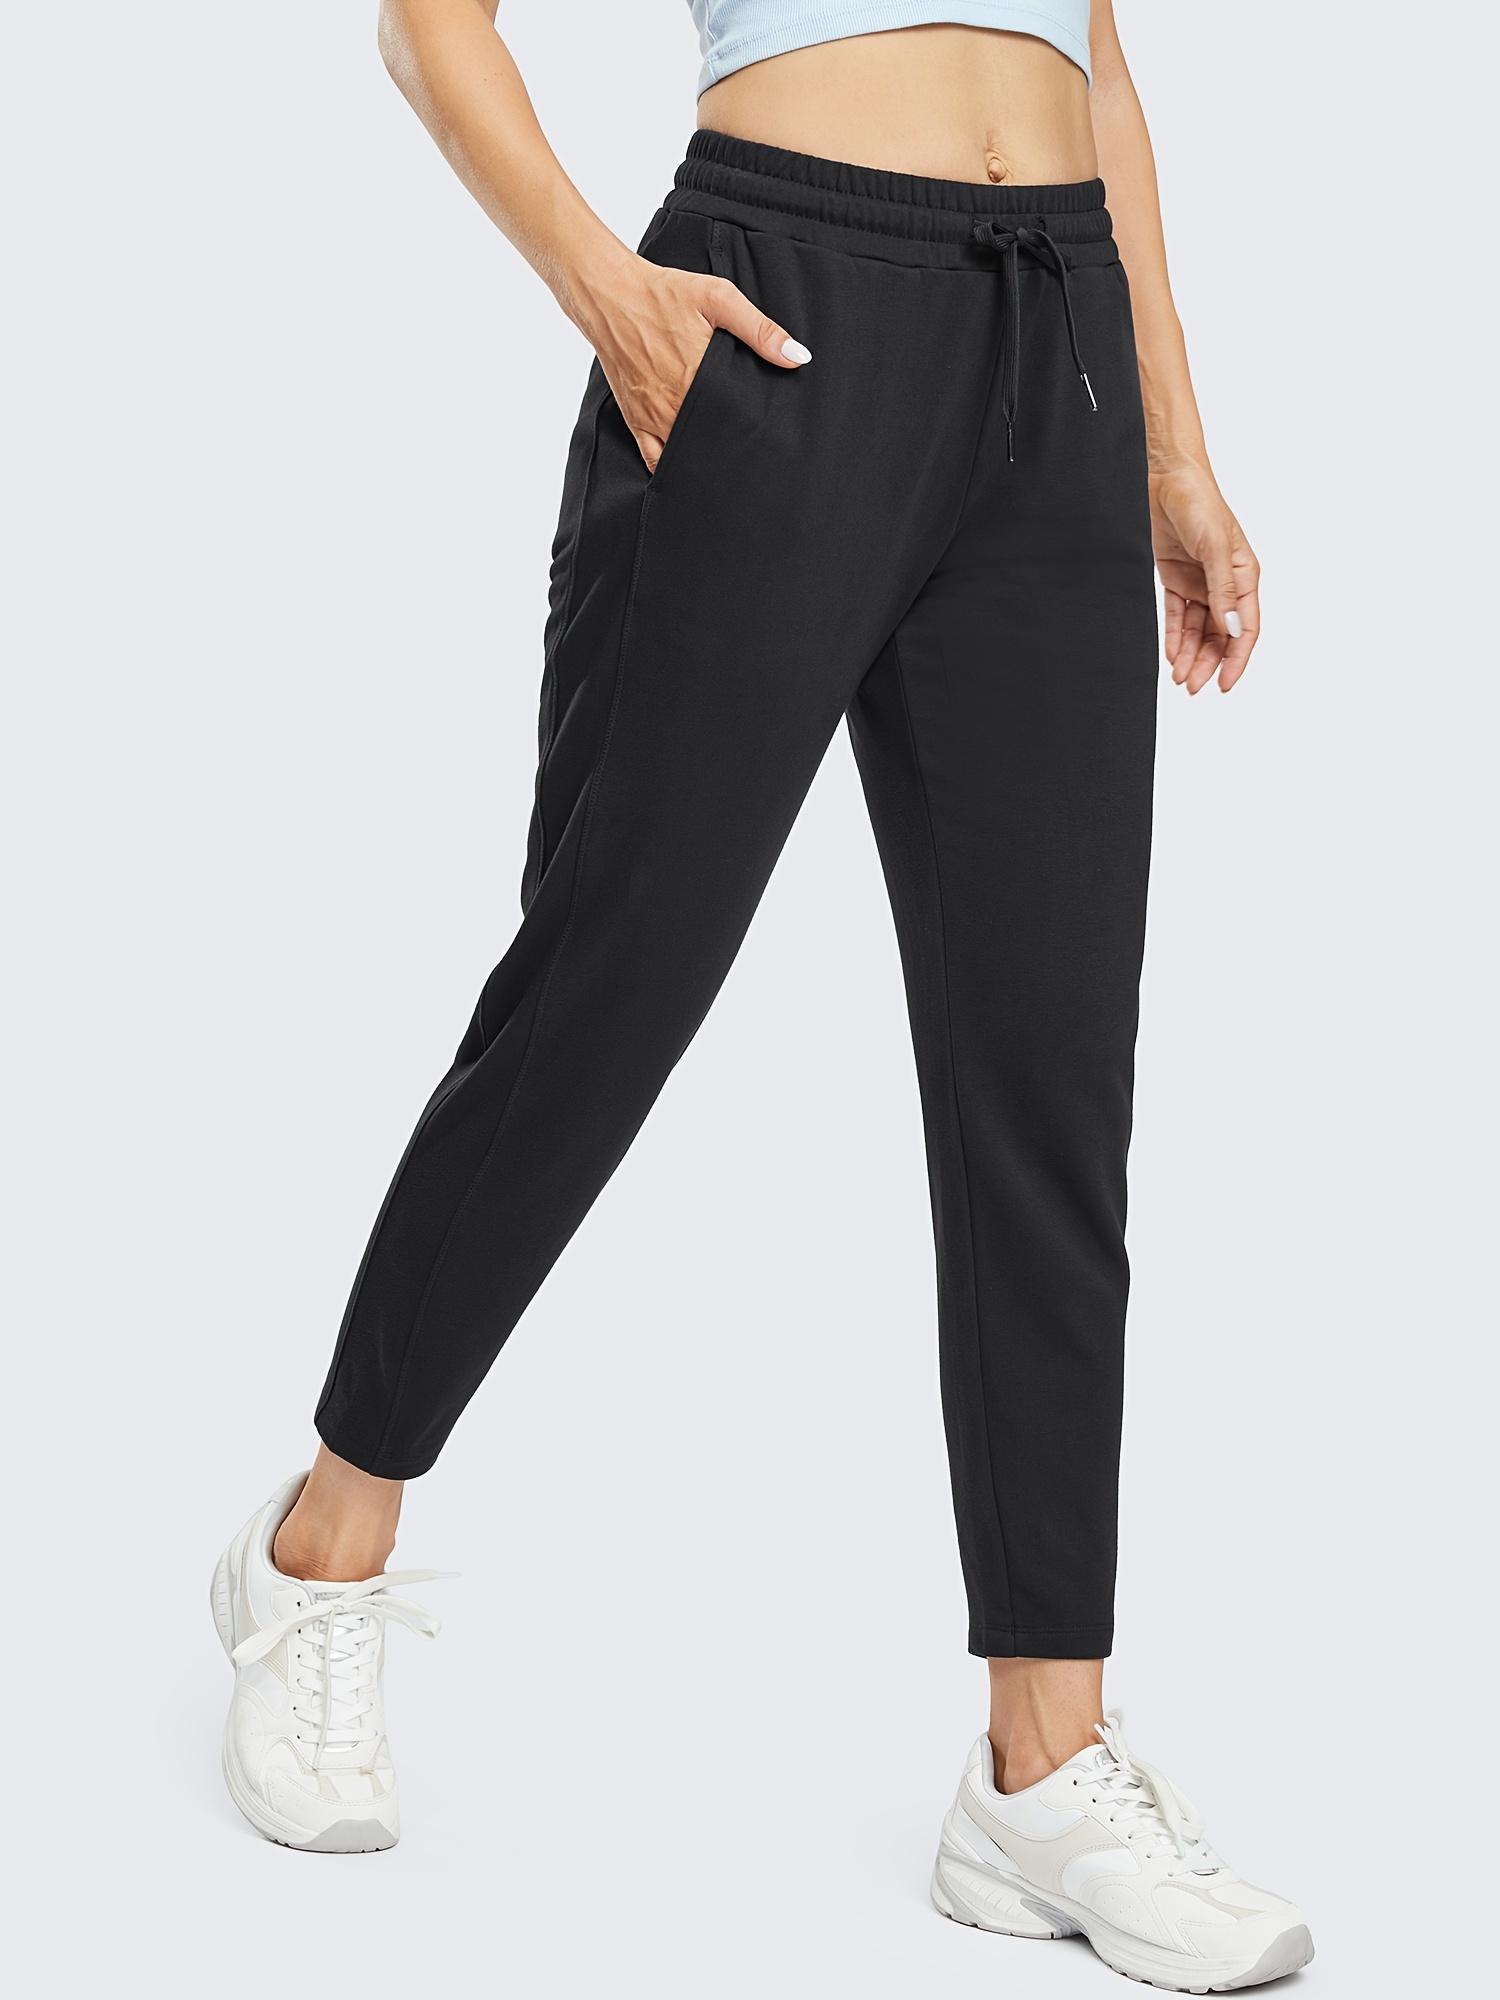 Sweatpants for Women, Joggers with Pockets for Yoga Workout